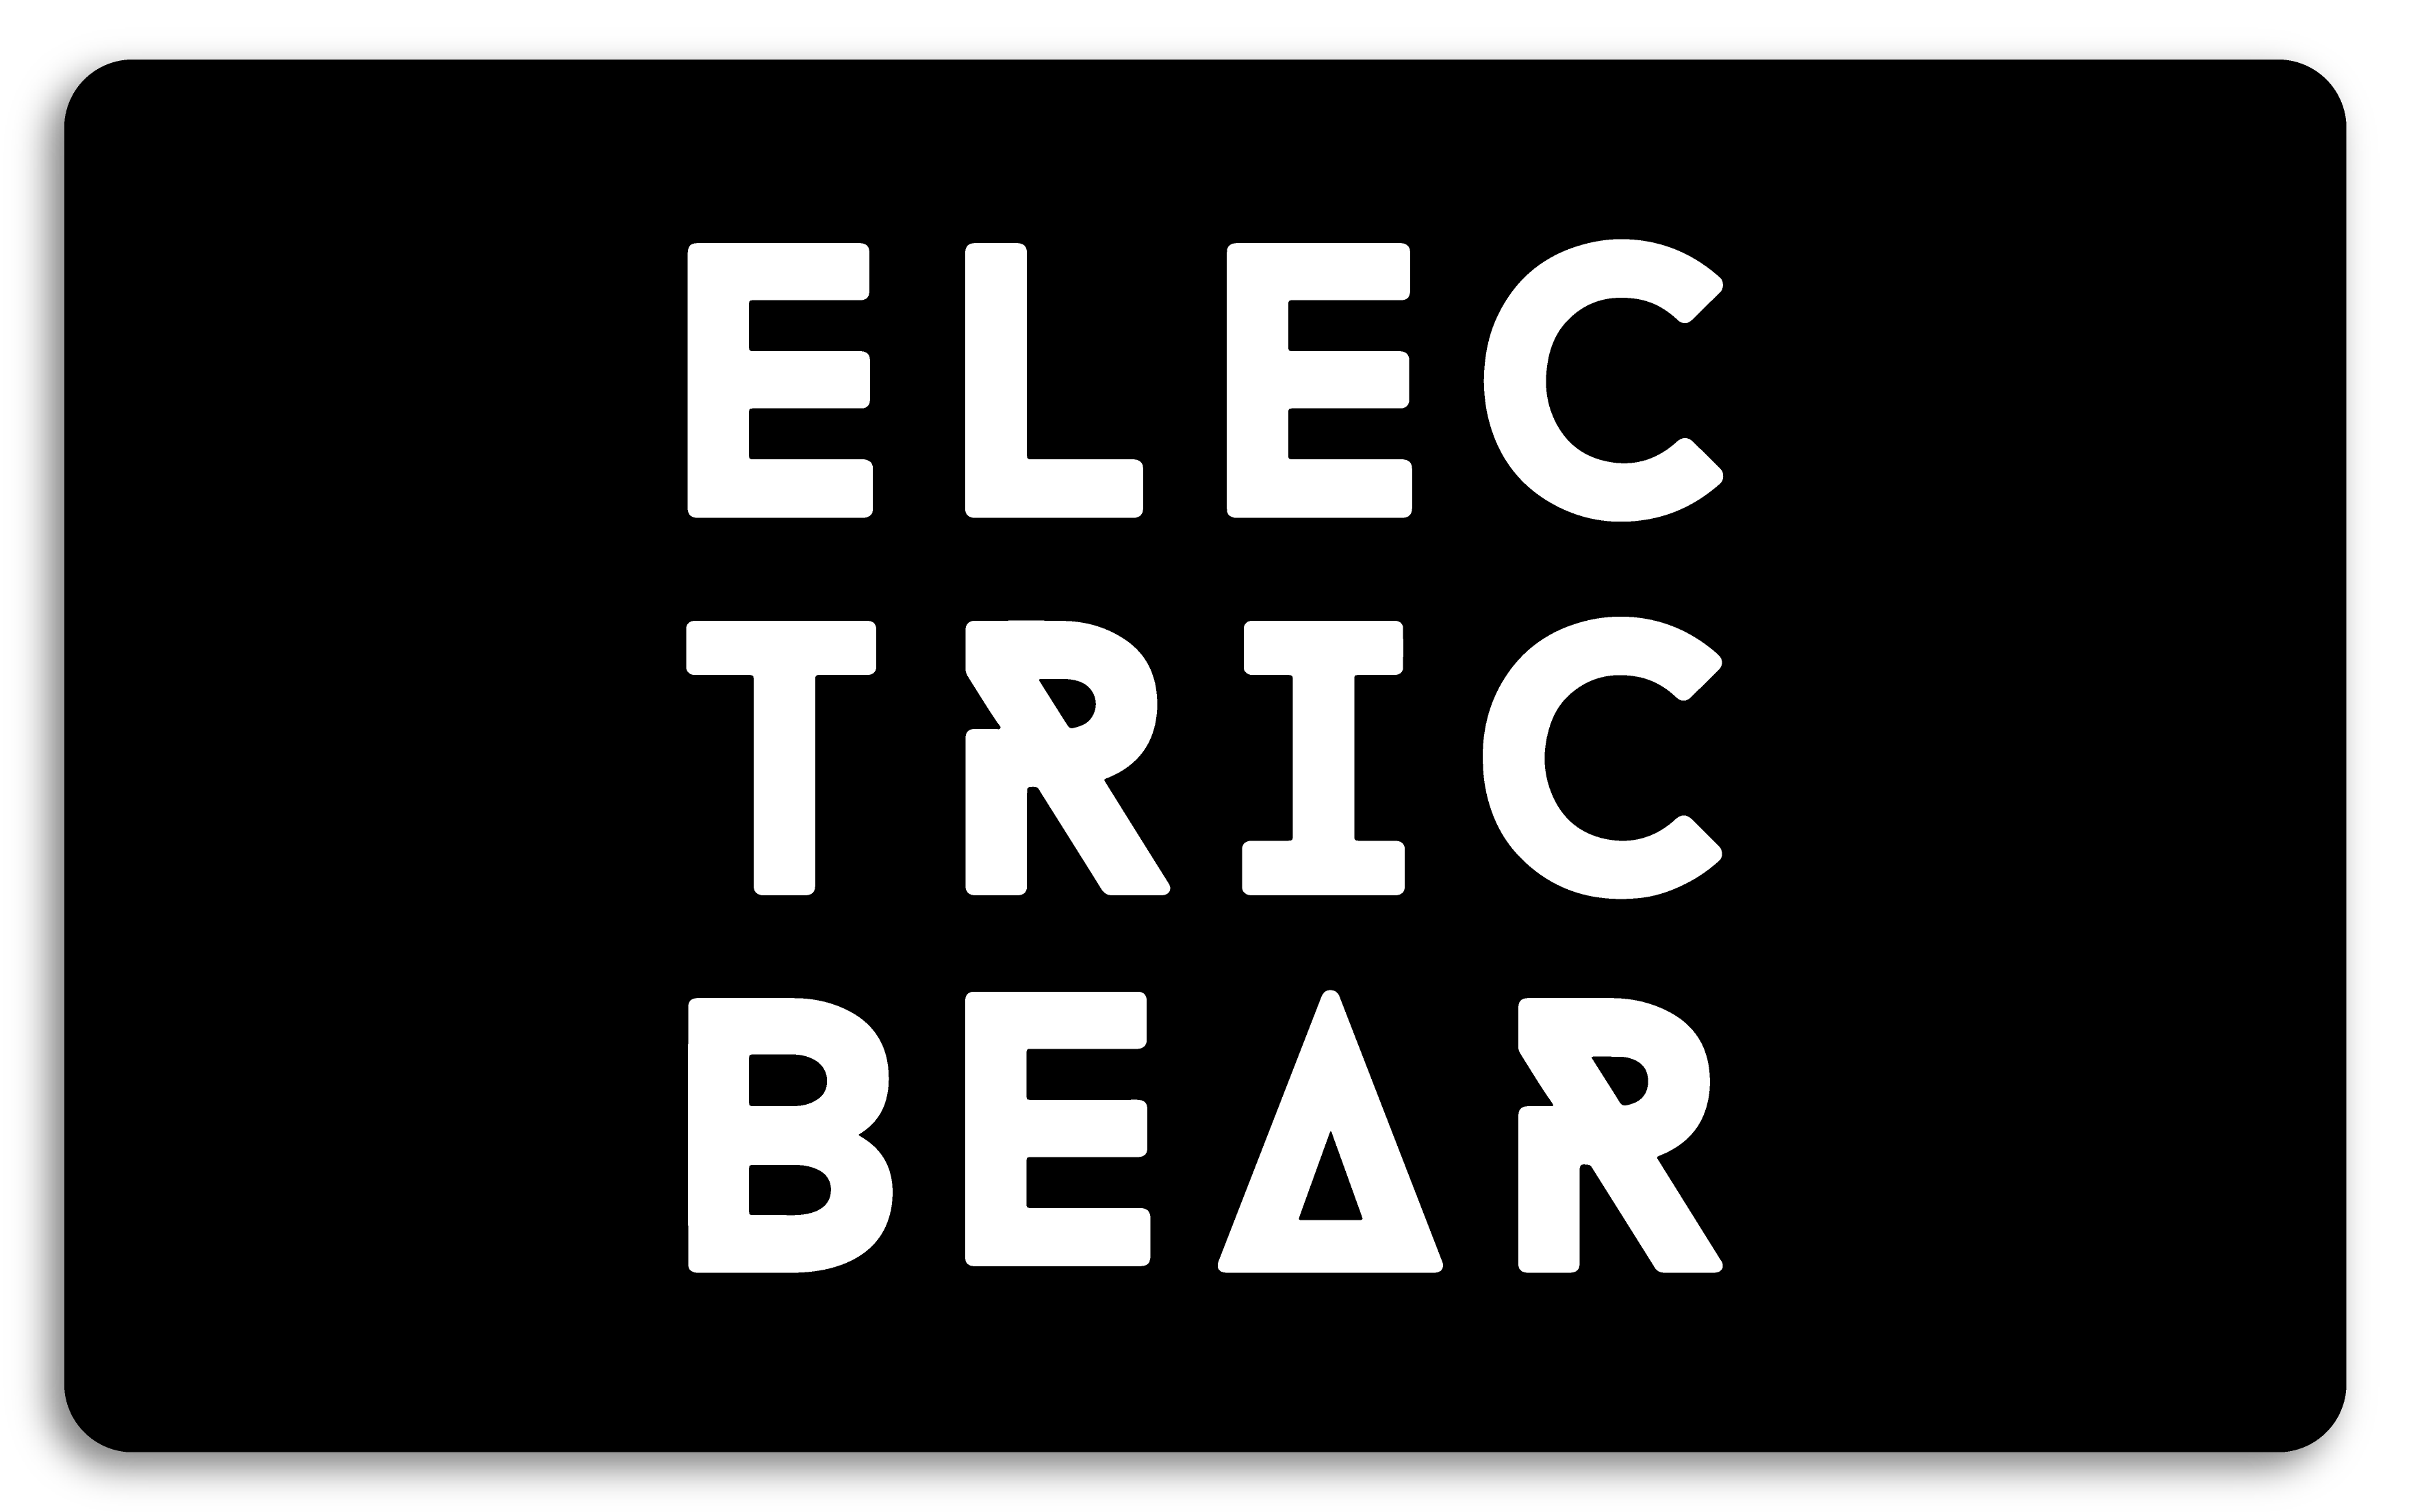 Electric Bear Brewing Co.